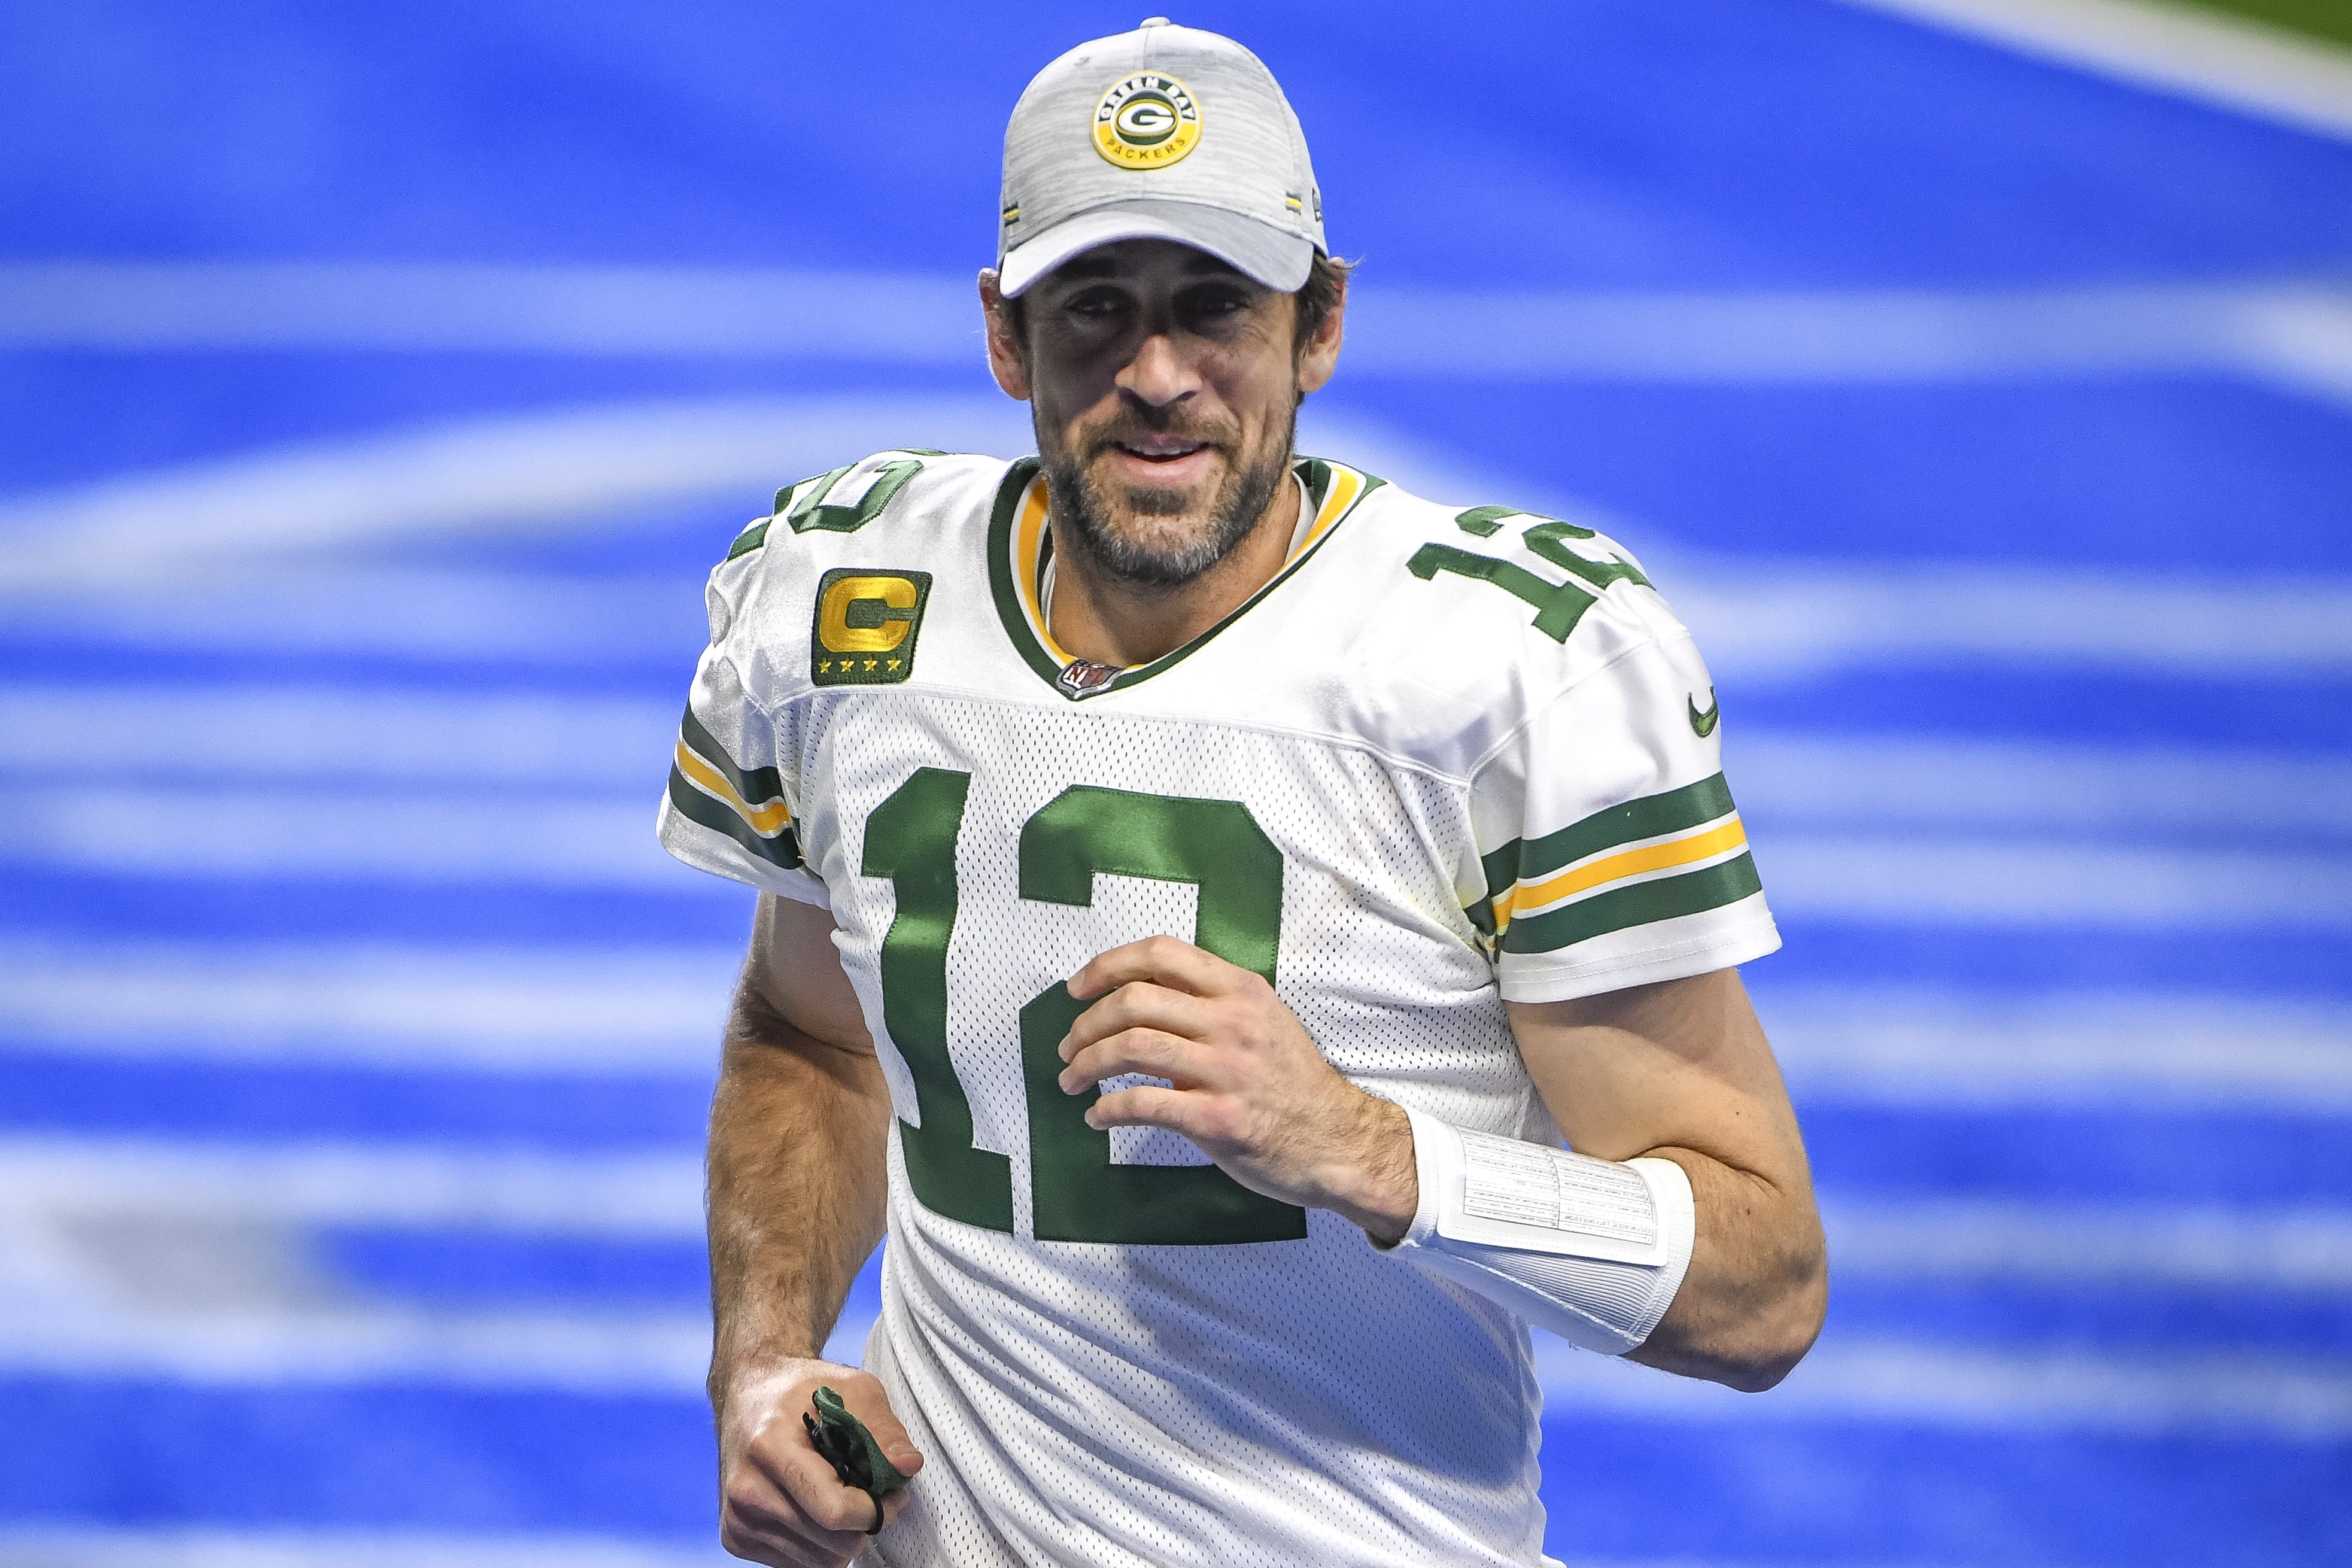 The Next "Jeopardy!" Guest Host ... Who Is Aaron Rodgers?